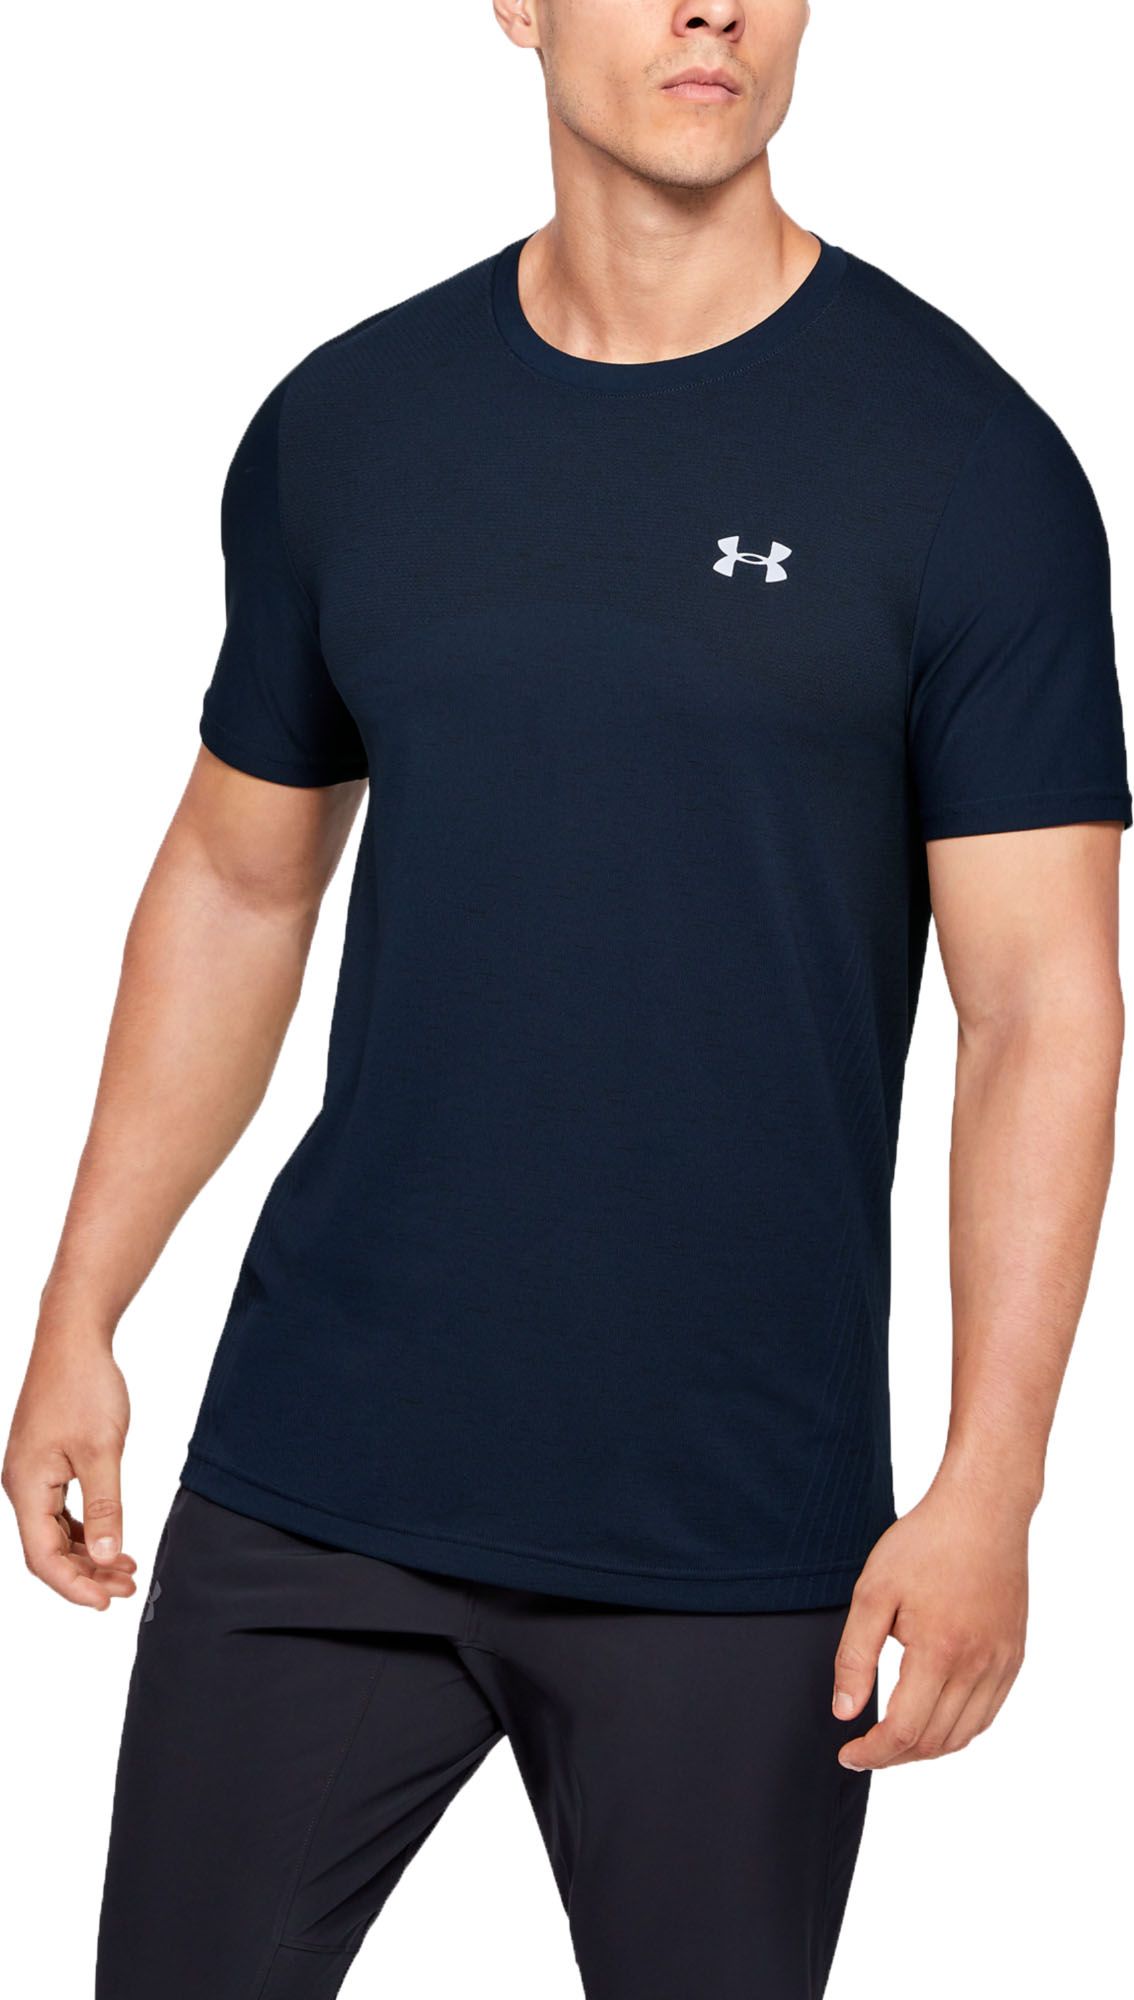 Under Armour Men's Freshwater Division Short Sleeve Tee NWT 2020 